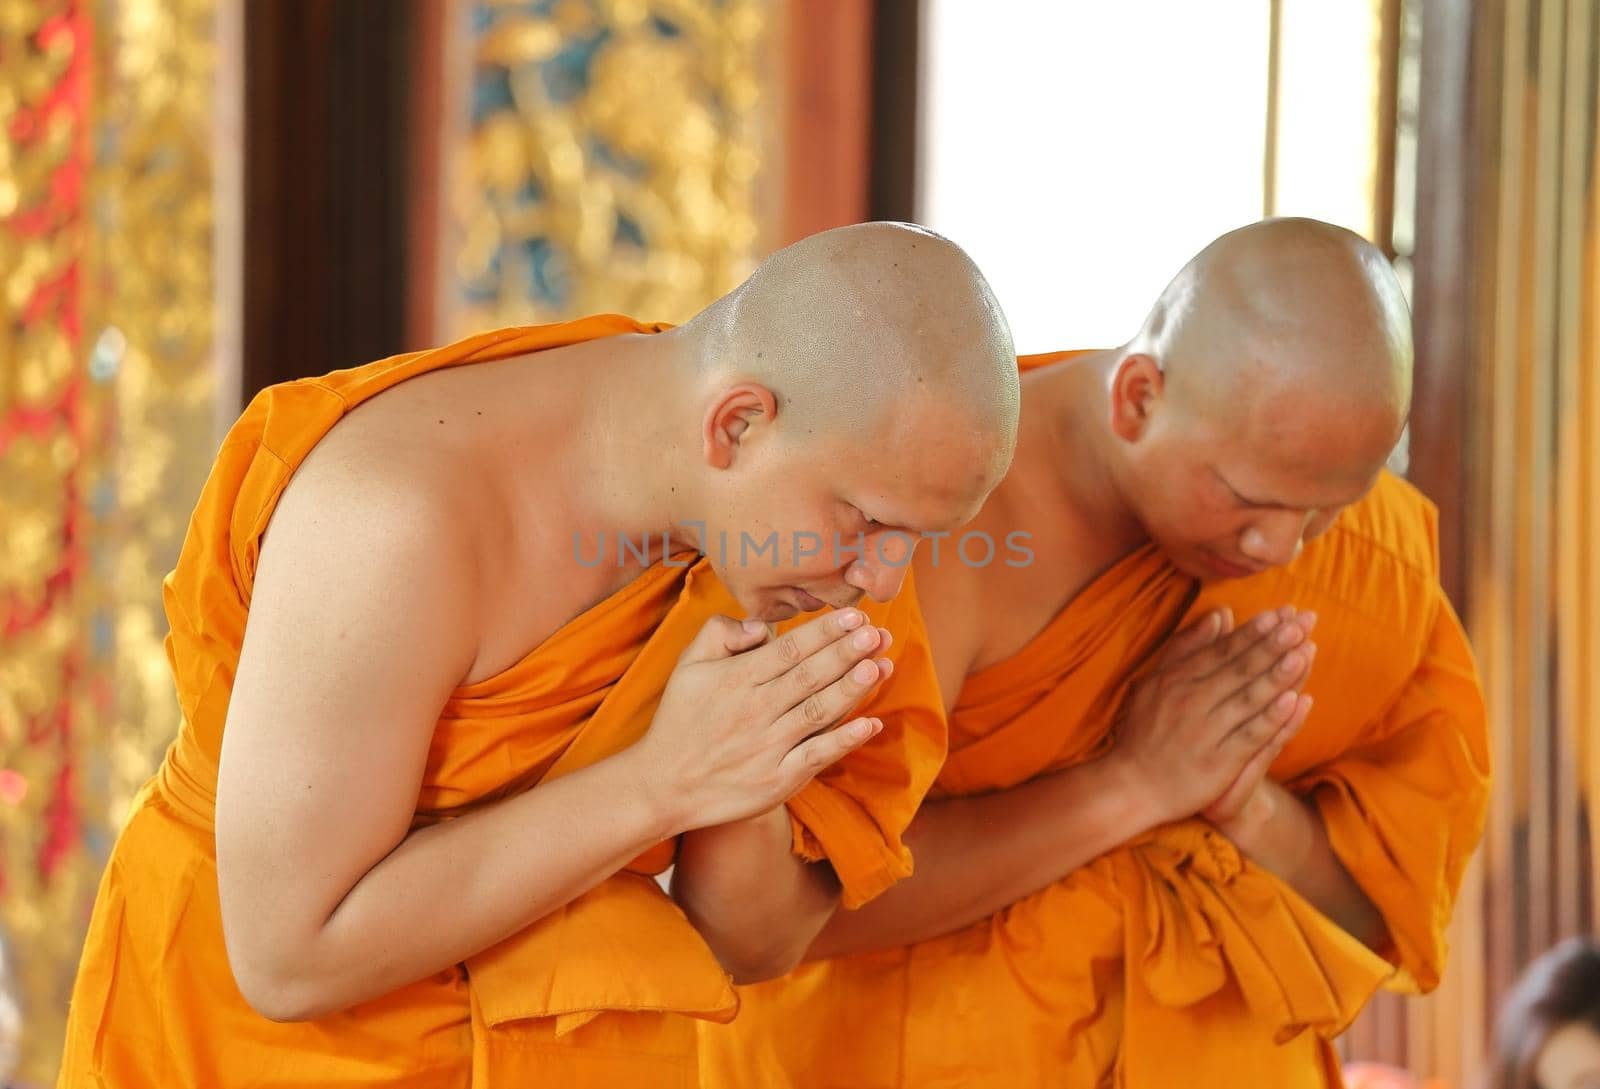 ordination ceremony that change the Thai young men to be the new monks by geargodz